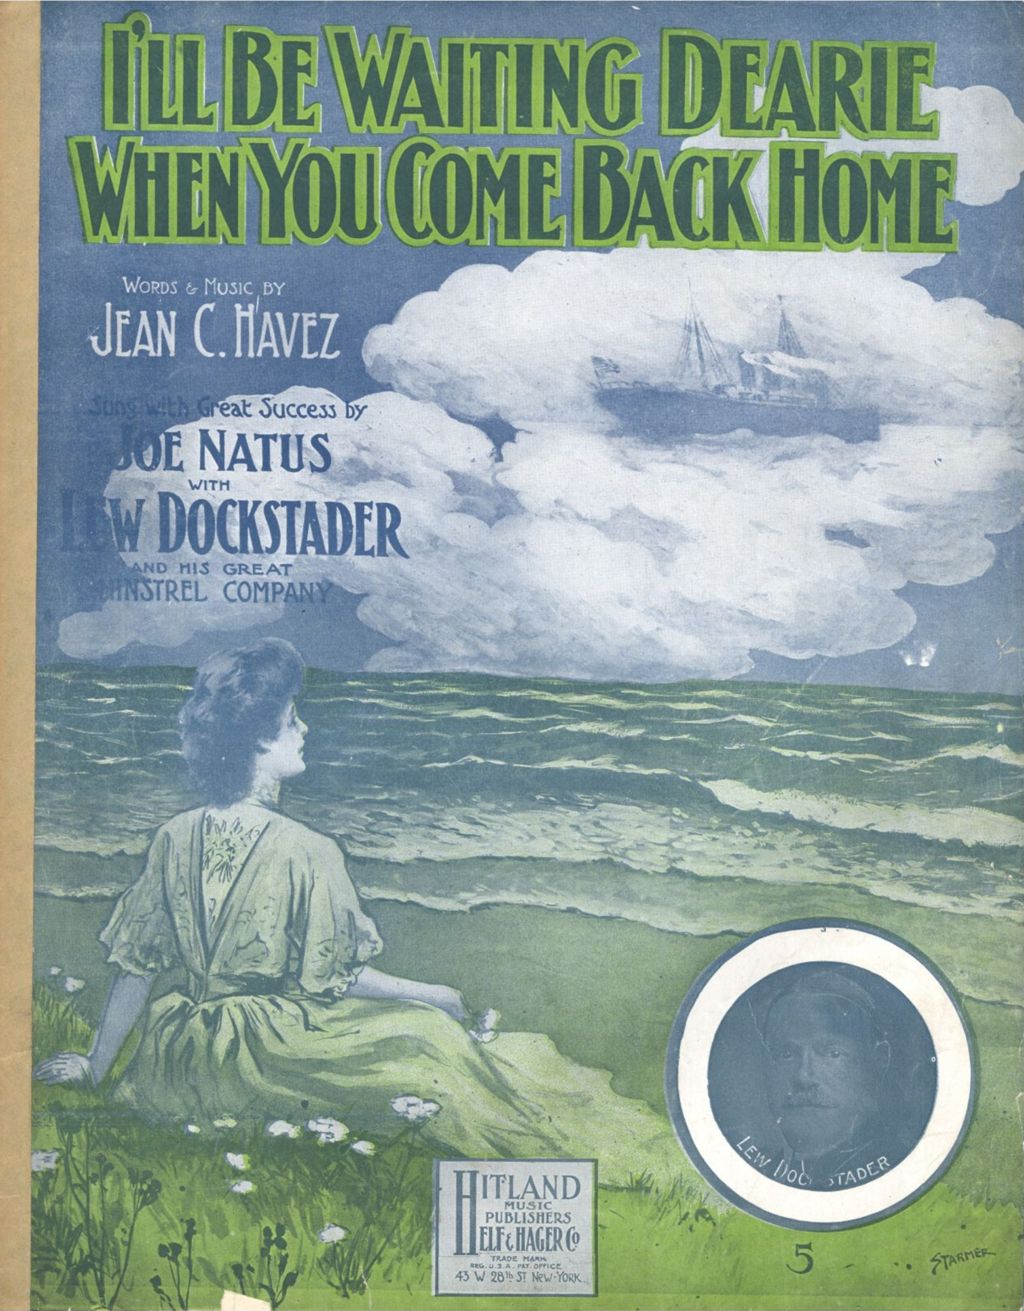 Miniature of I'll Be Waiting Dearie When You Come Back Home